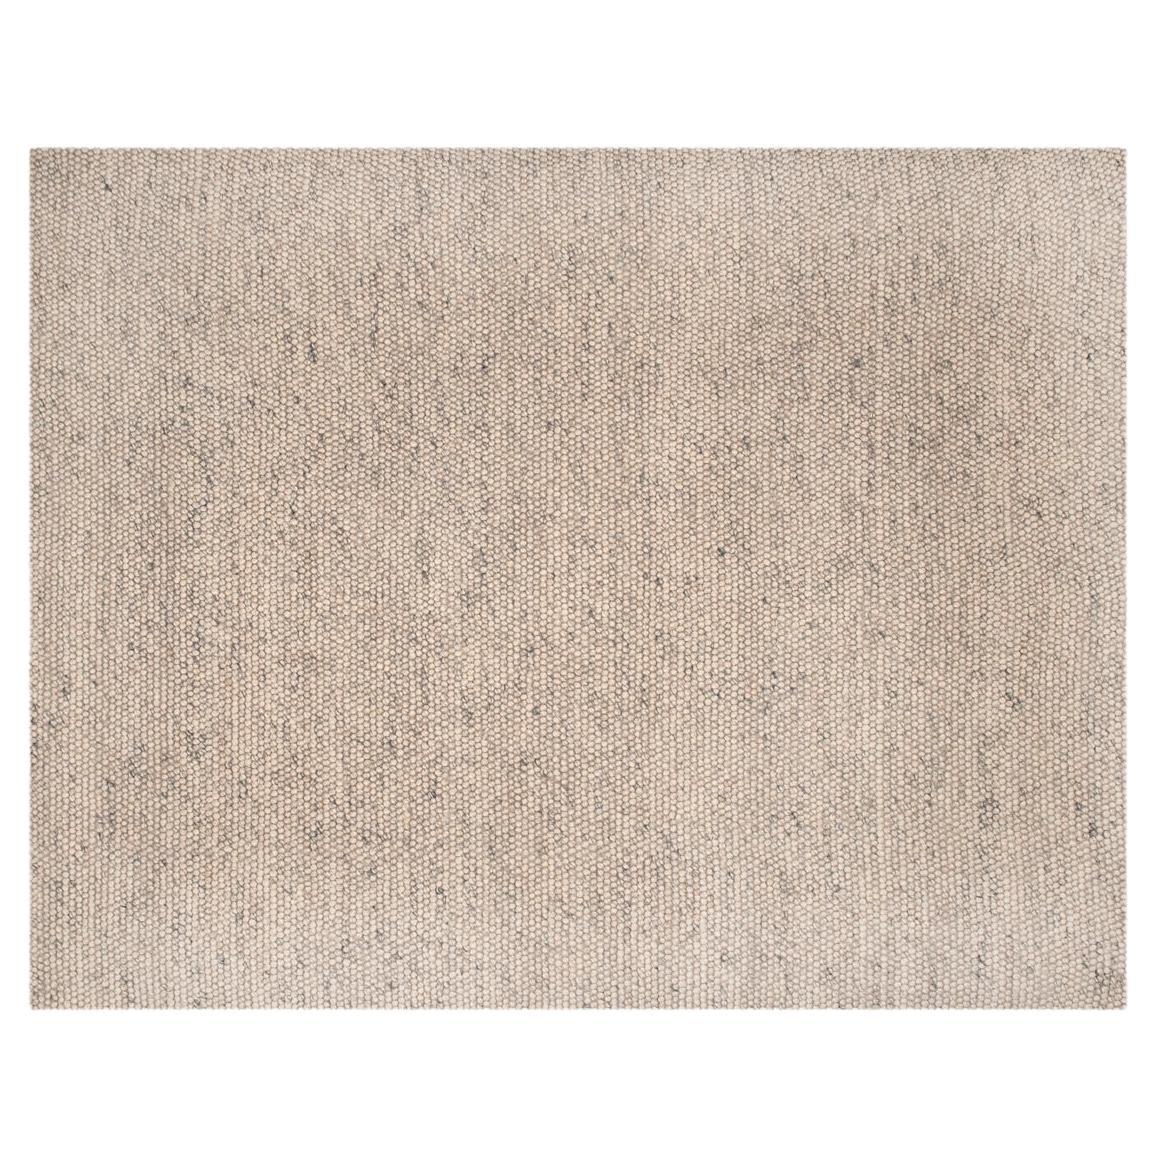 Contemporary Modern Handwoven Wool Thick Rug Bubbles Ivory & Grey Mottled For Sale